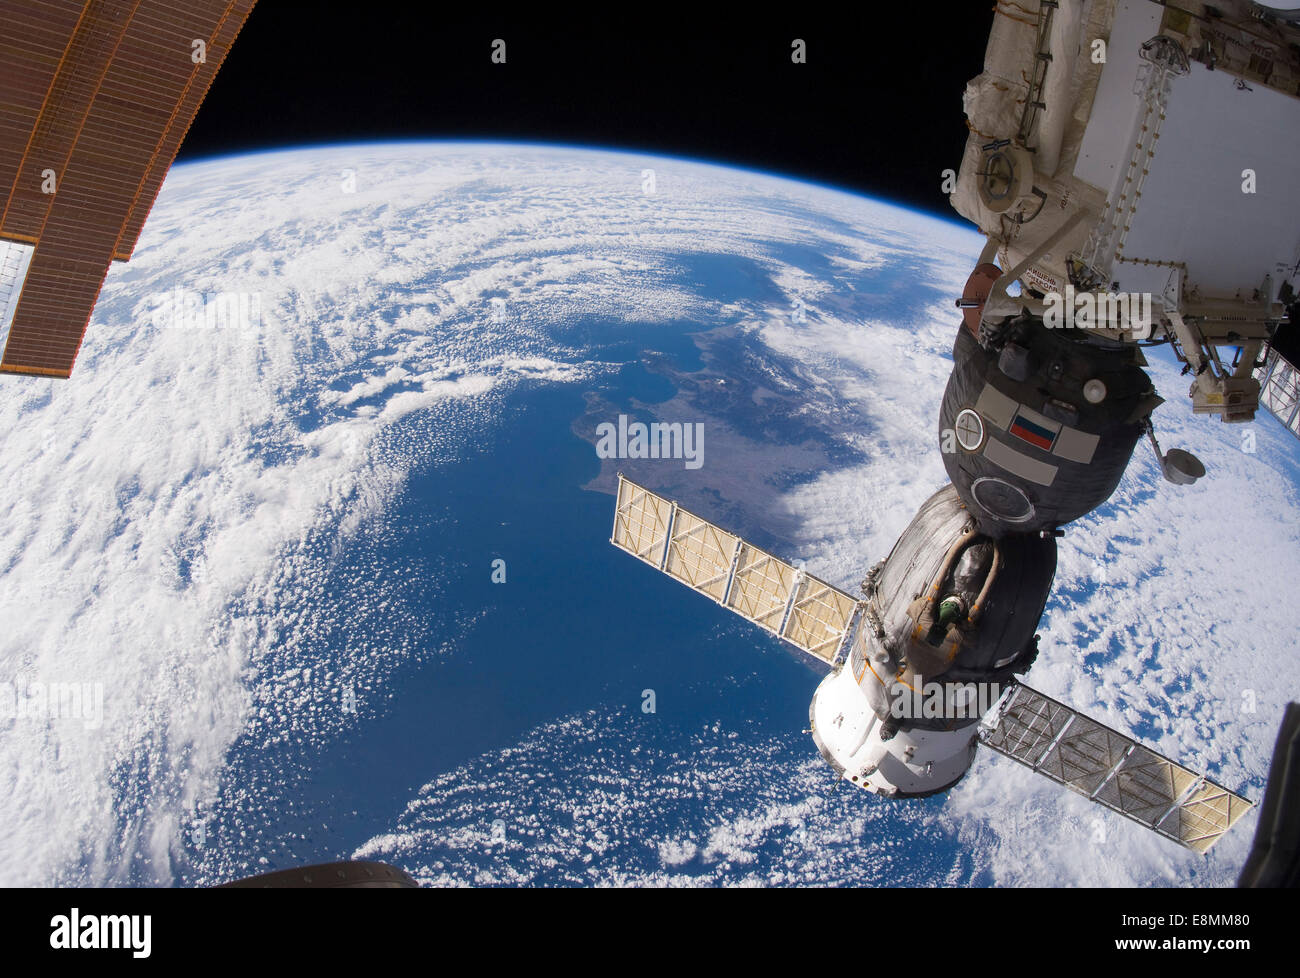 January 31, 2011 - A Russian Soyuz spacecraft docked to the International Space Station. A blue and white part of Earth and the Stock Photo